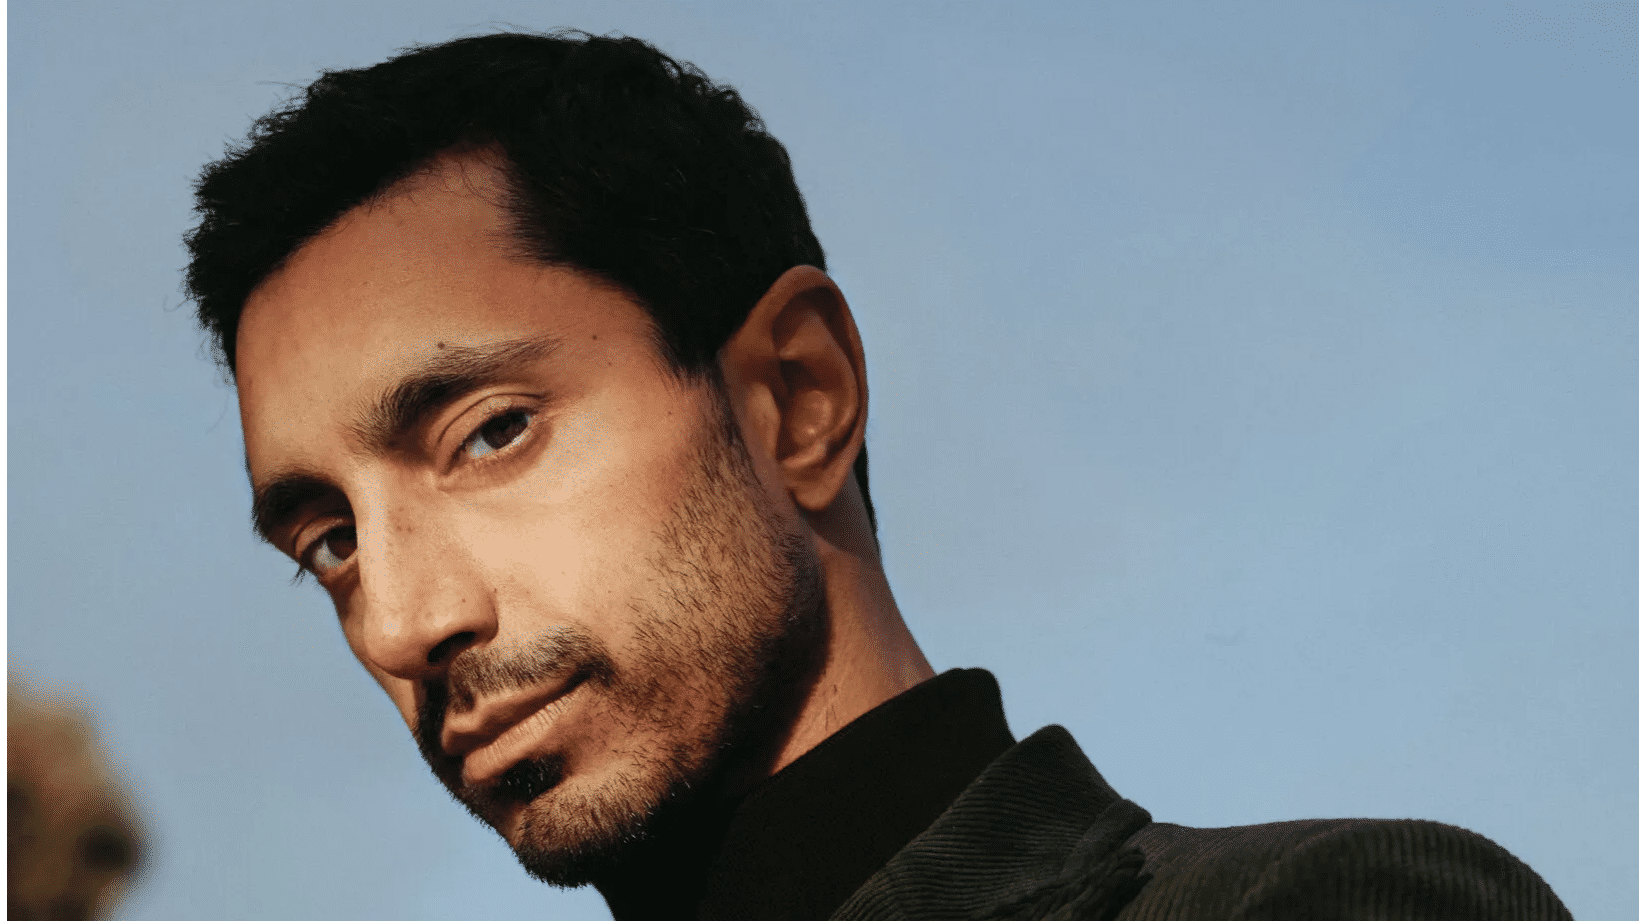 Obama-owned production house signs Riz Ahmed for a movie